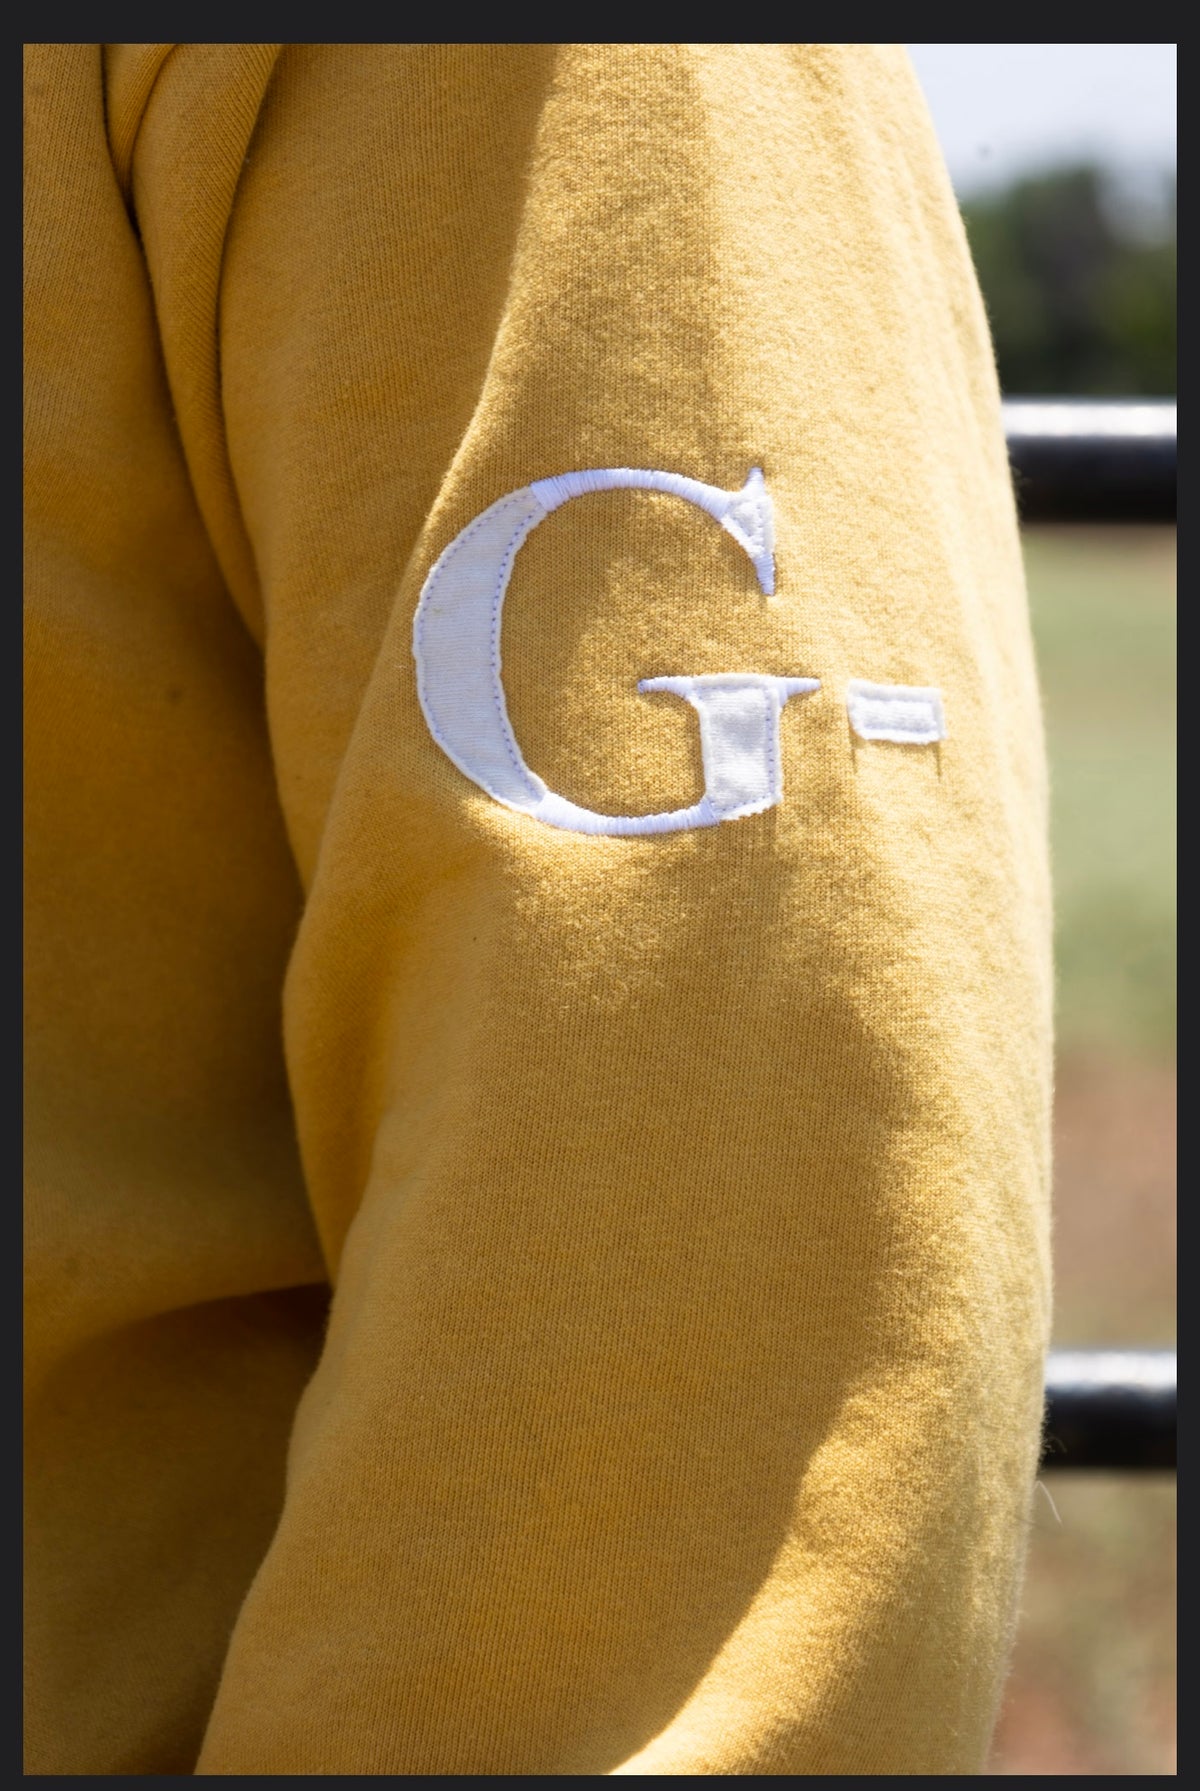 Griswold Cattle Hoody- Yellow